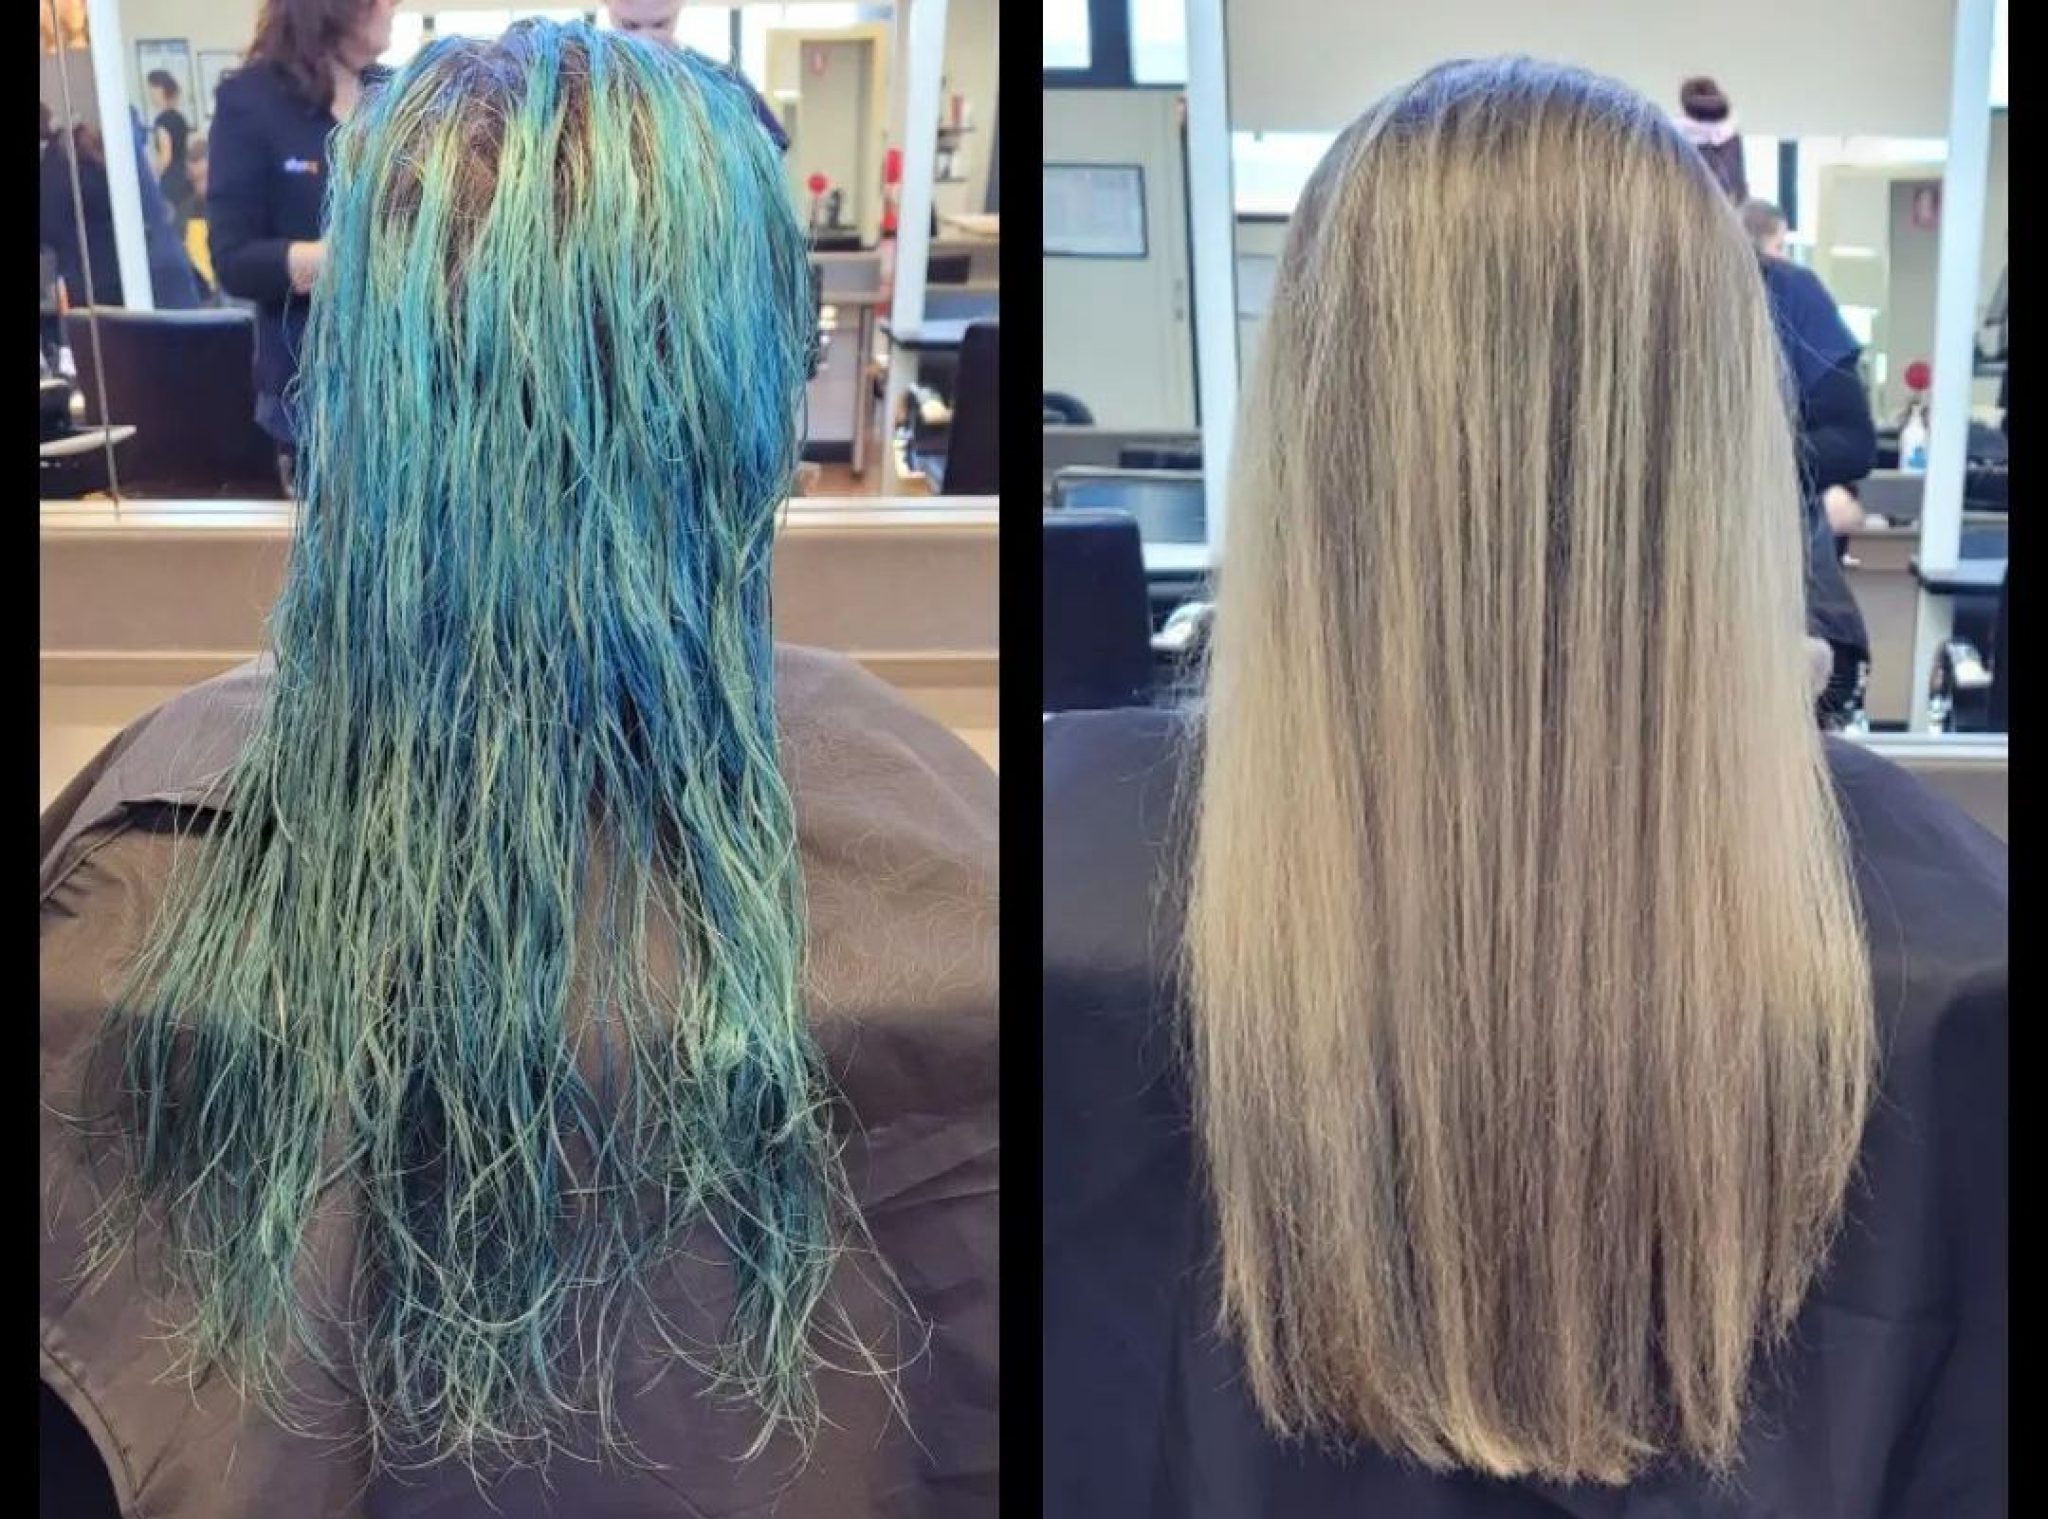 1. How to Remove Blue Hair Dye - wide 1